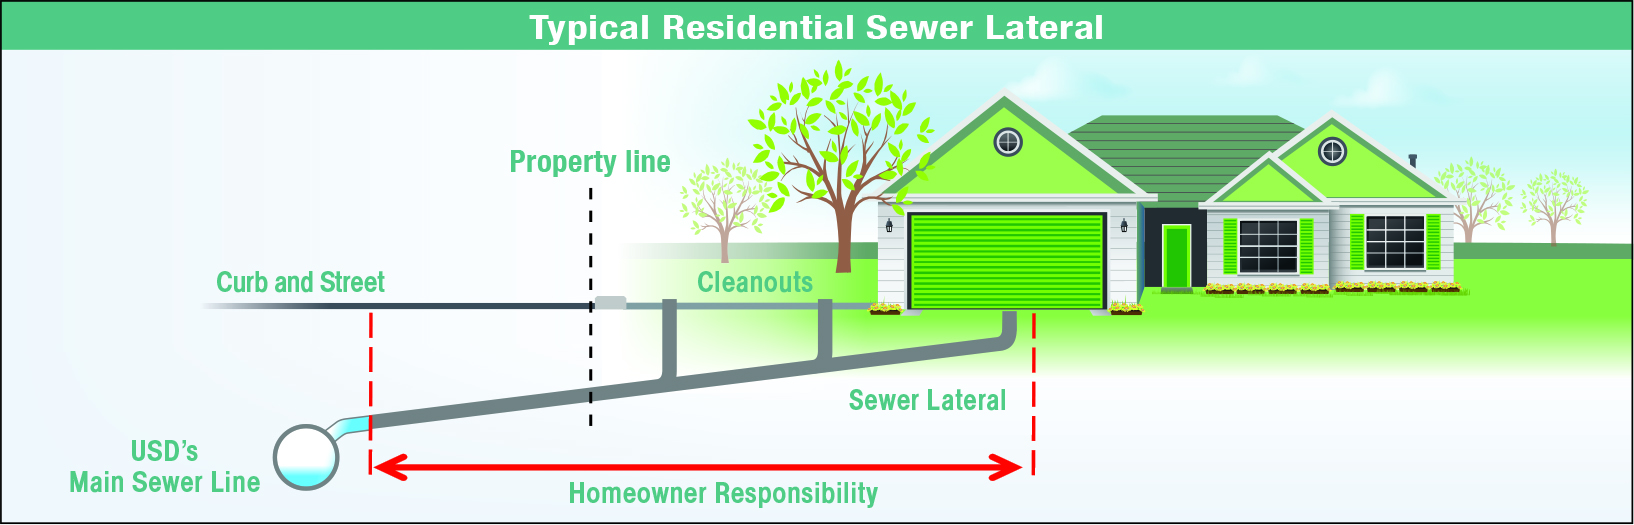 USD Typical Residential Sewer Lateral